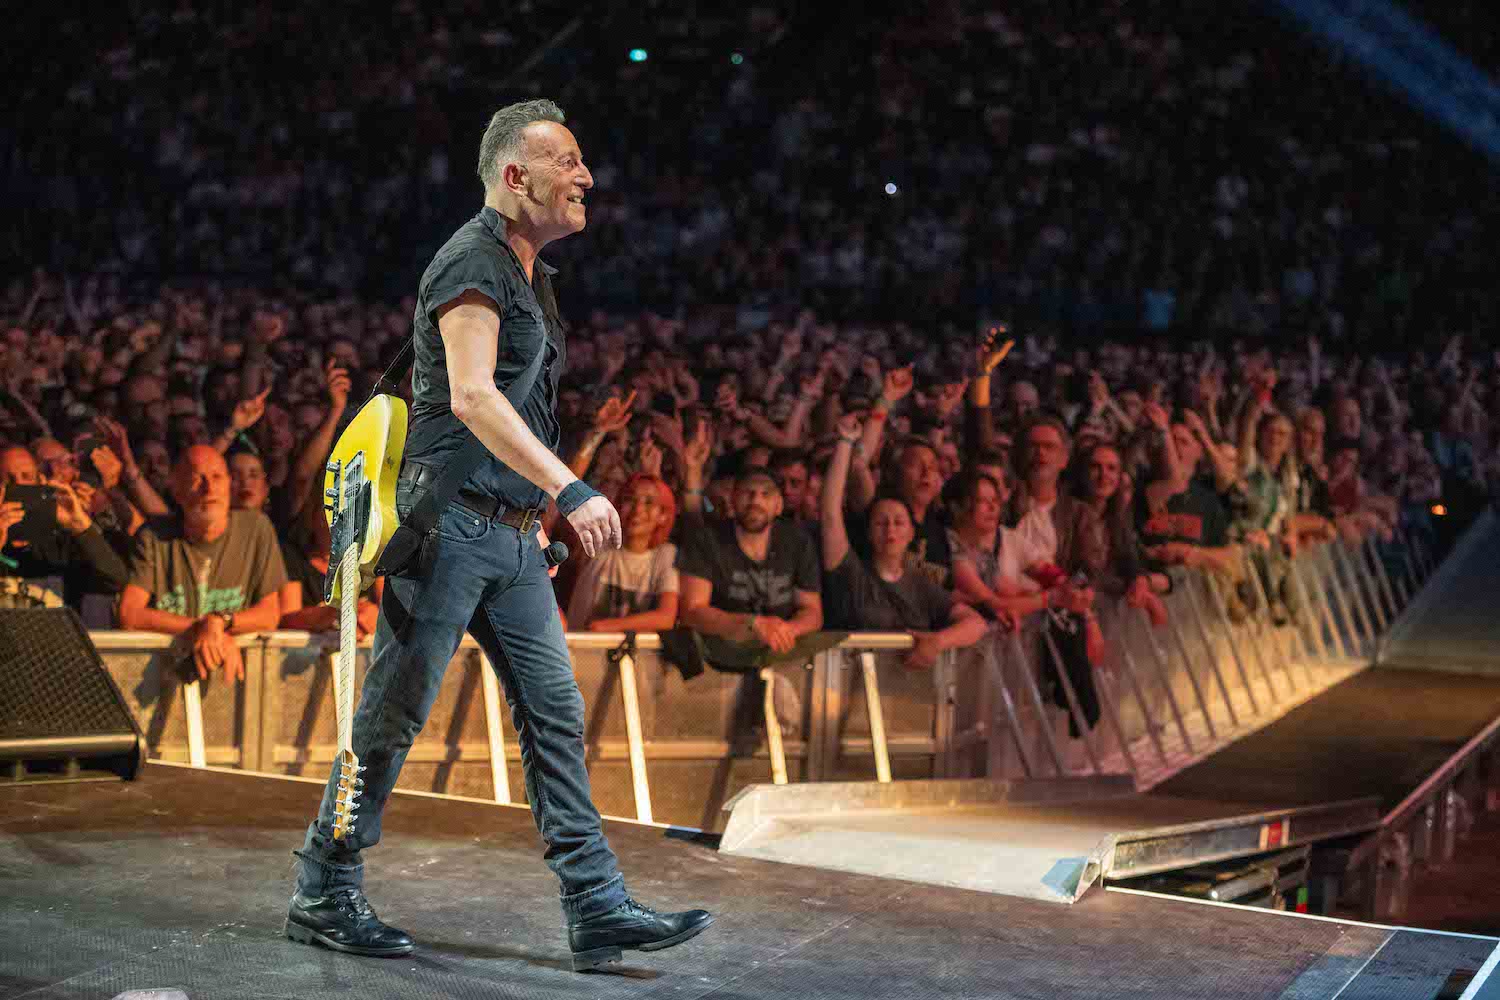 Bruce Springsteen & E Street Band at La Défense Arena, Paris, France on May 13, 2023.